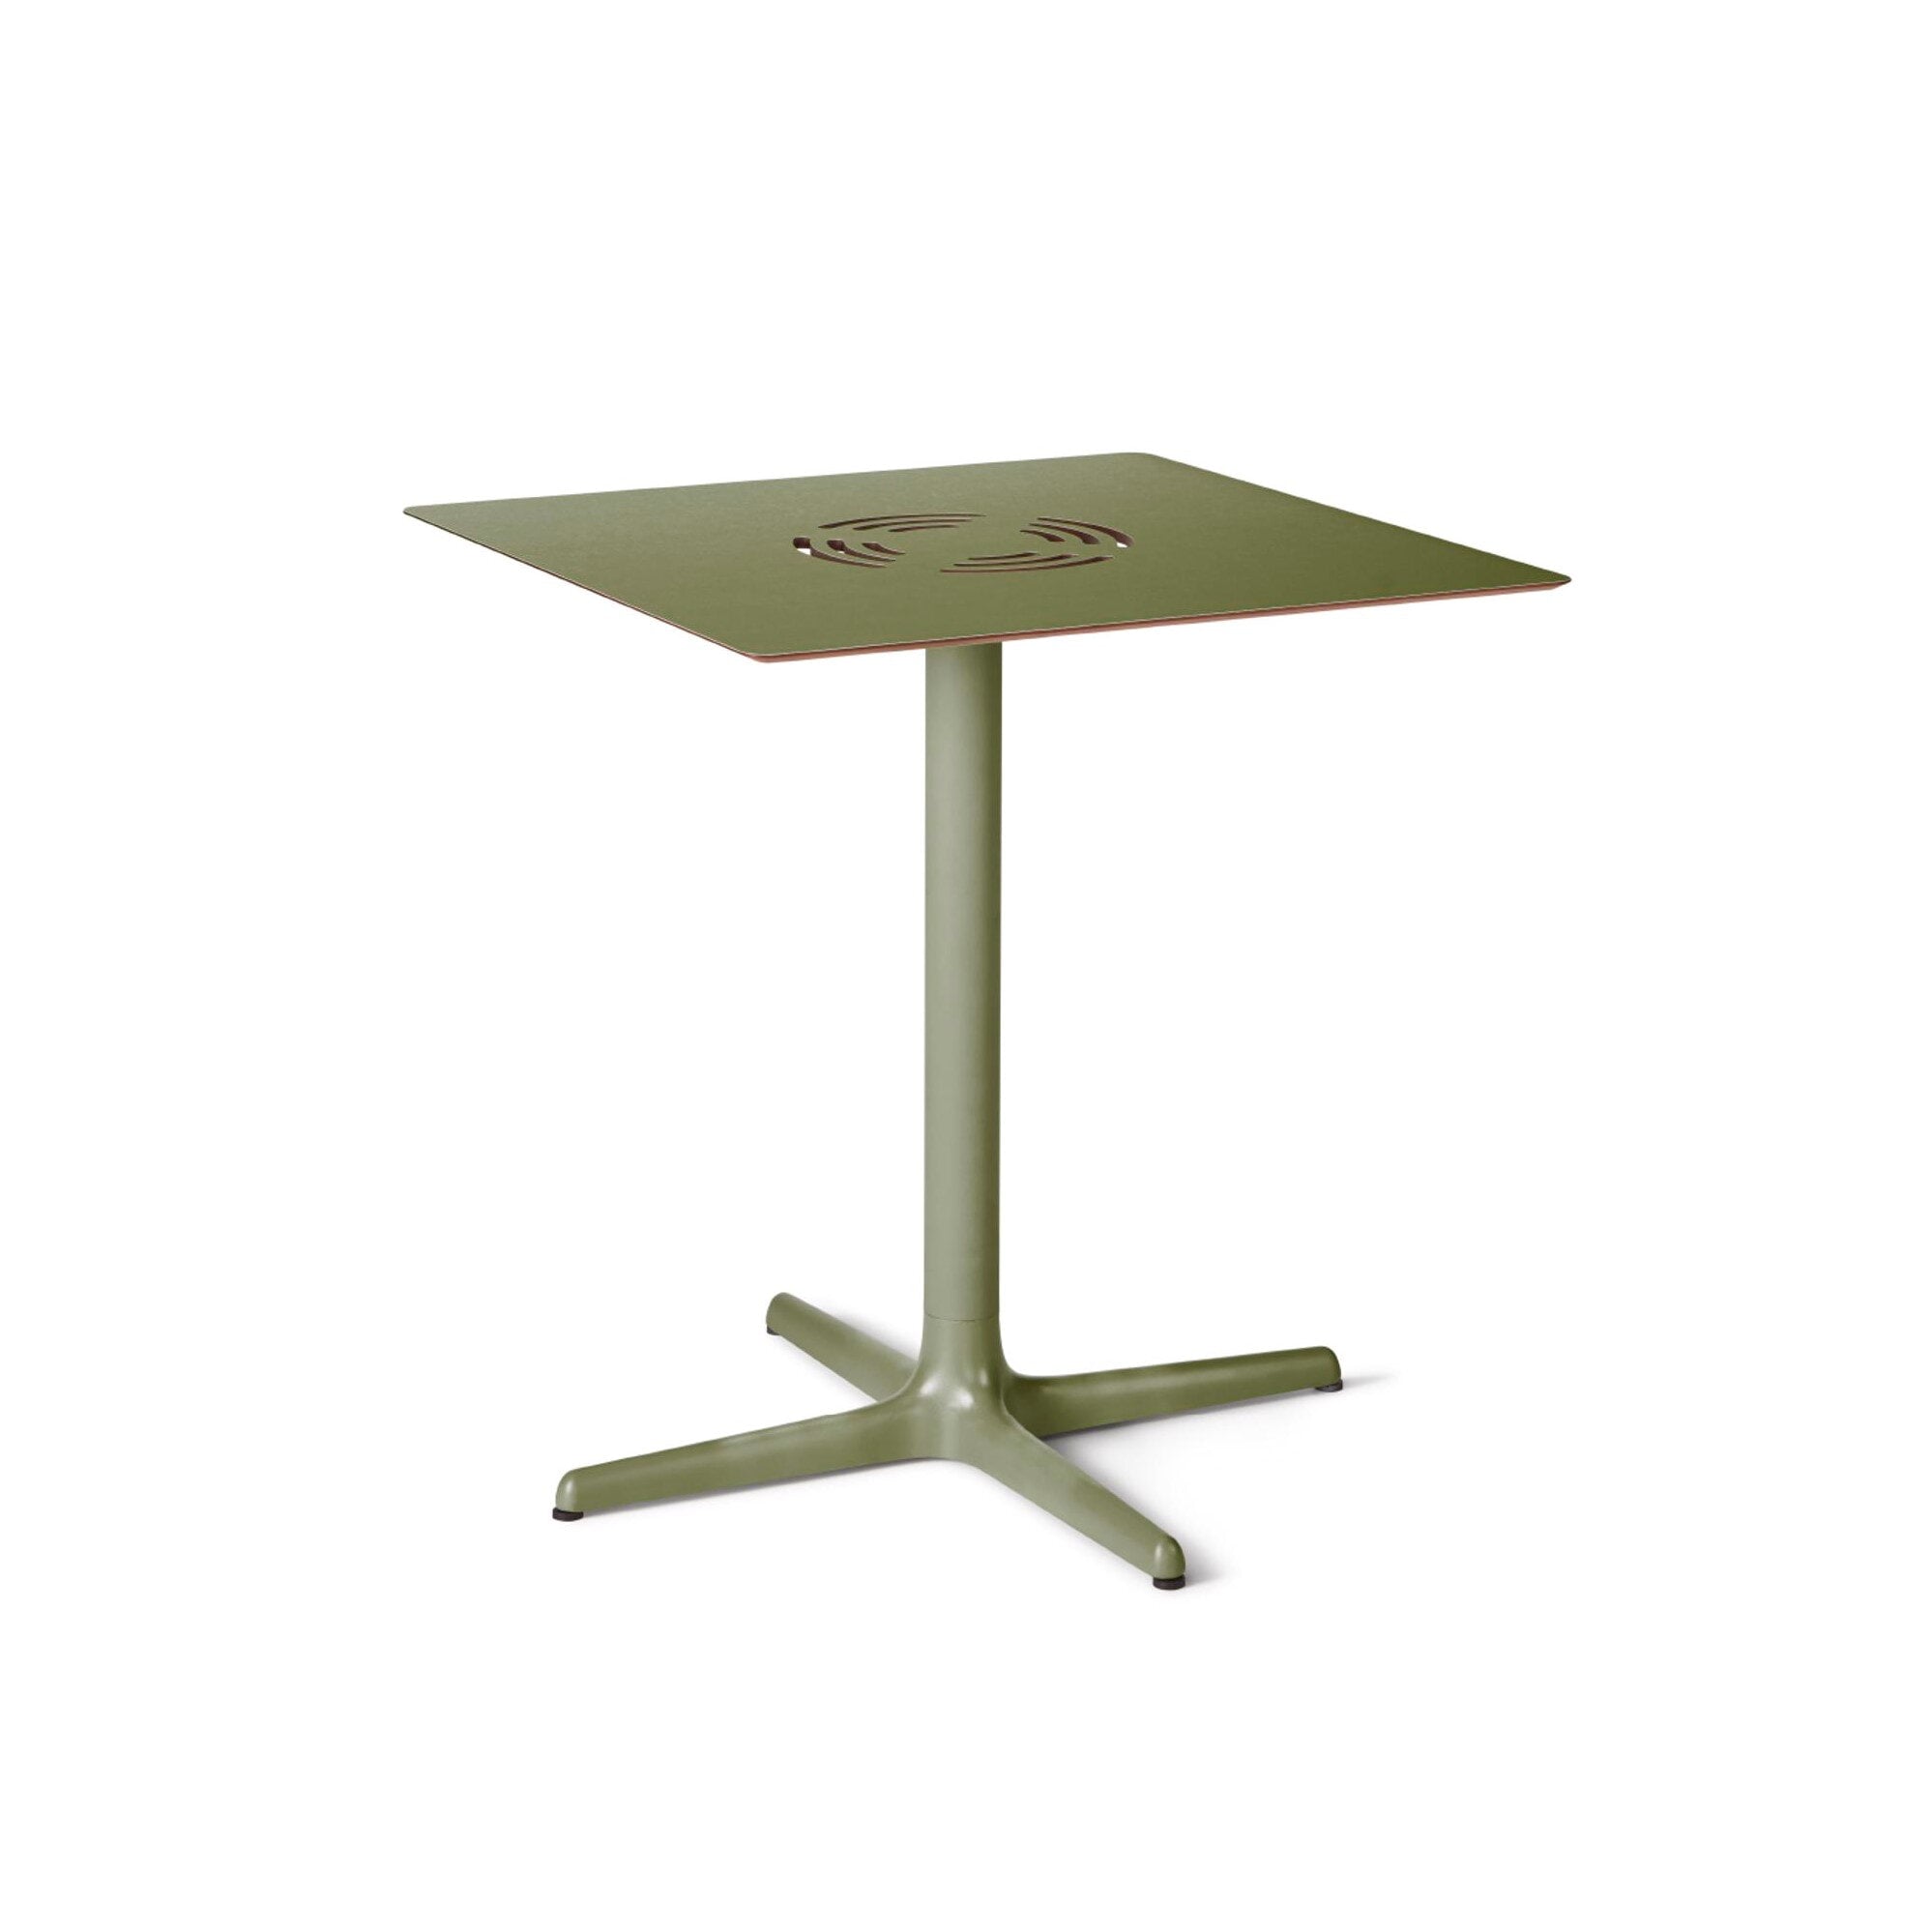 Resol Toledo Aire Square Table indoors, outdoors 70x70